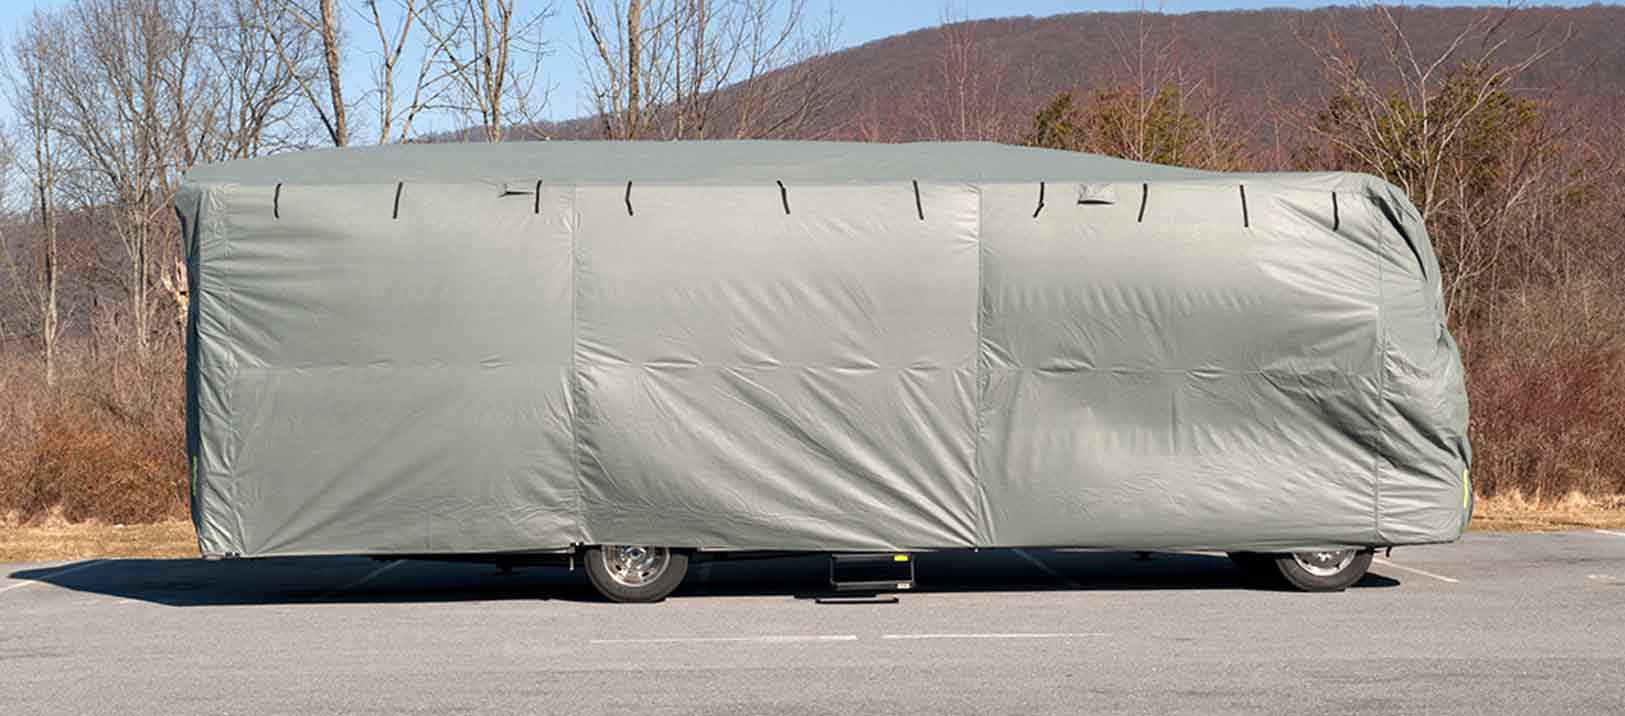 pros and cons of rv covers